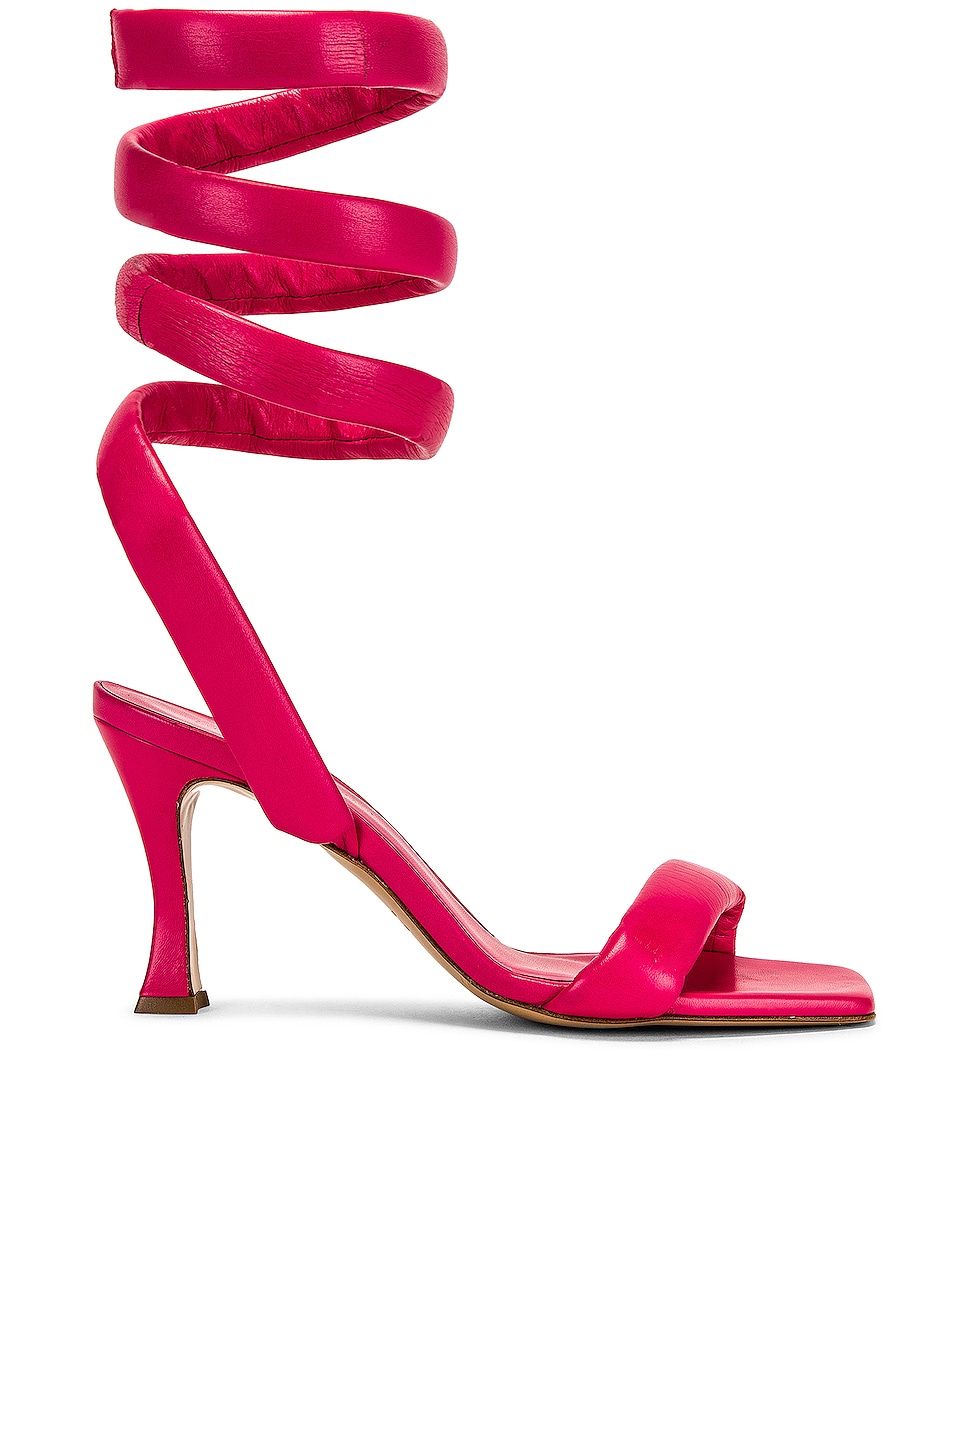 Image 1 of SILVIA TCHERASSI Mika Heels in Orchid